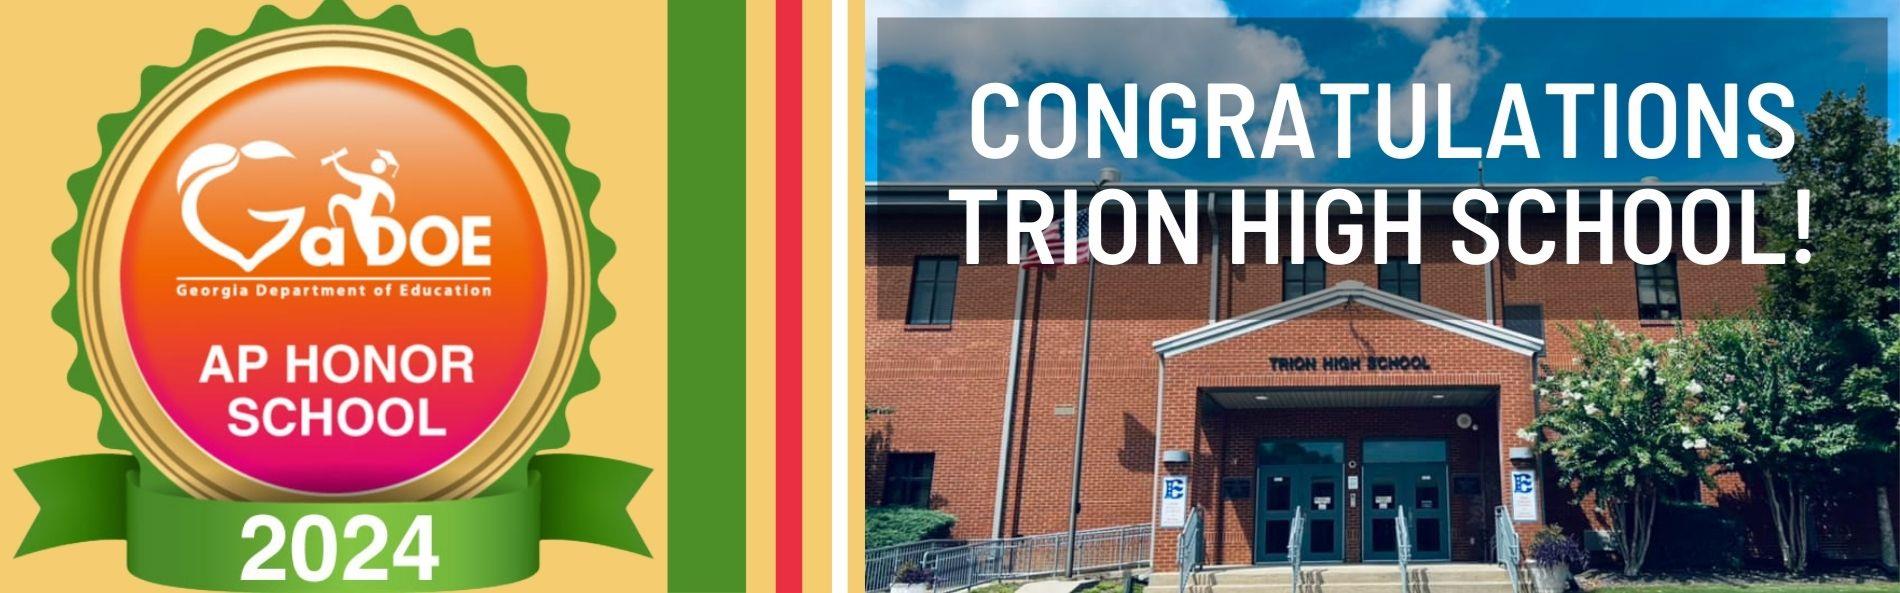 TRION HIGH SCHOOL IS NAMED 2024 AP HONOR SCHOOL: CLICK HYPERLINK TO READ PRESS RELEASE